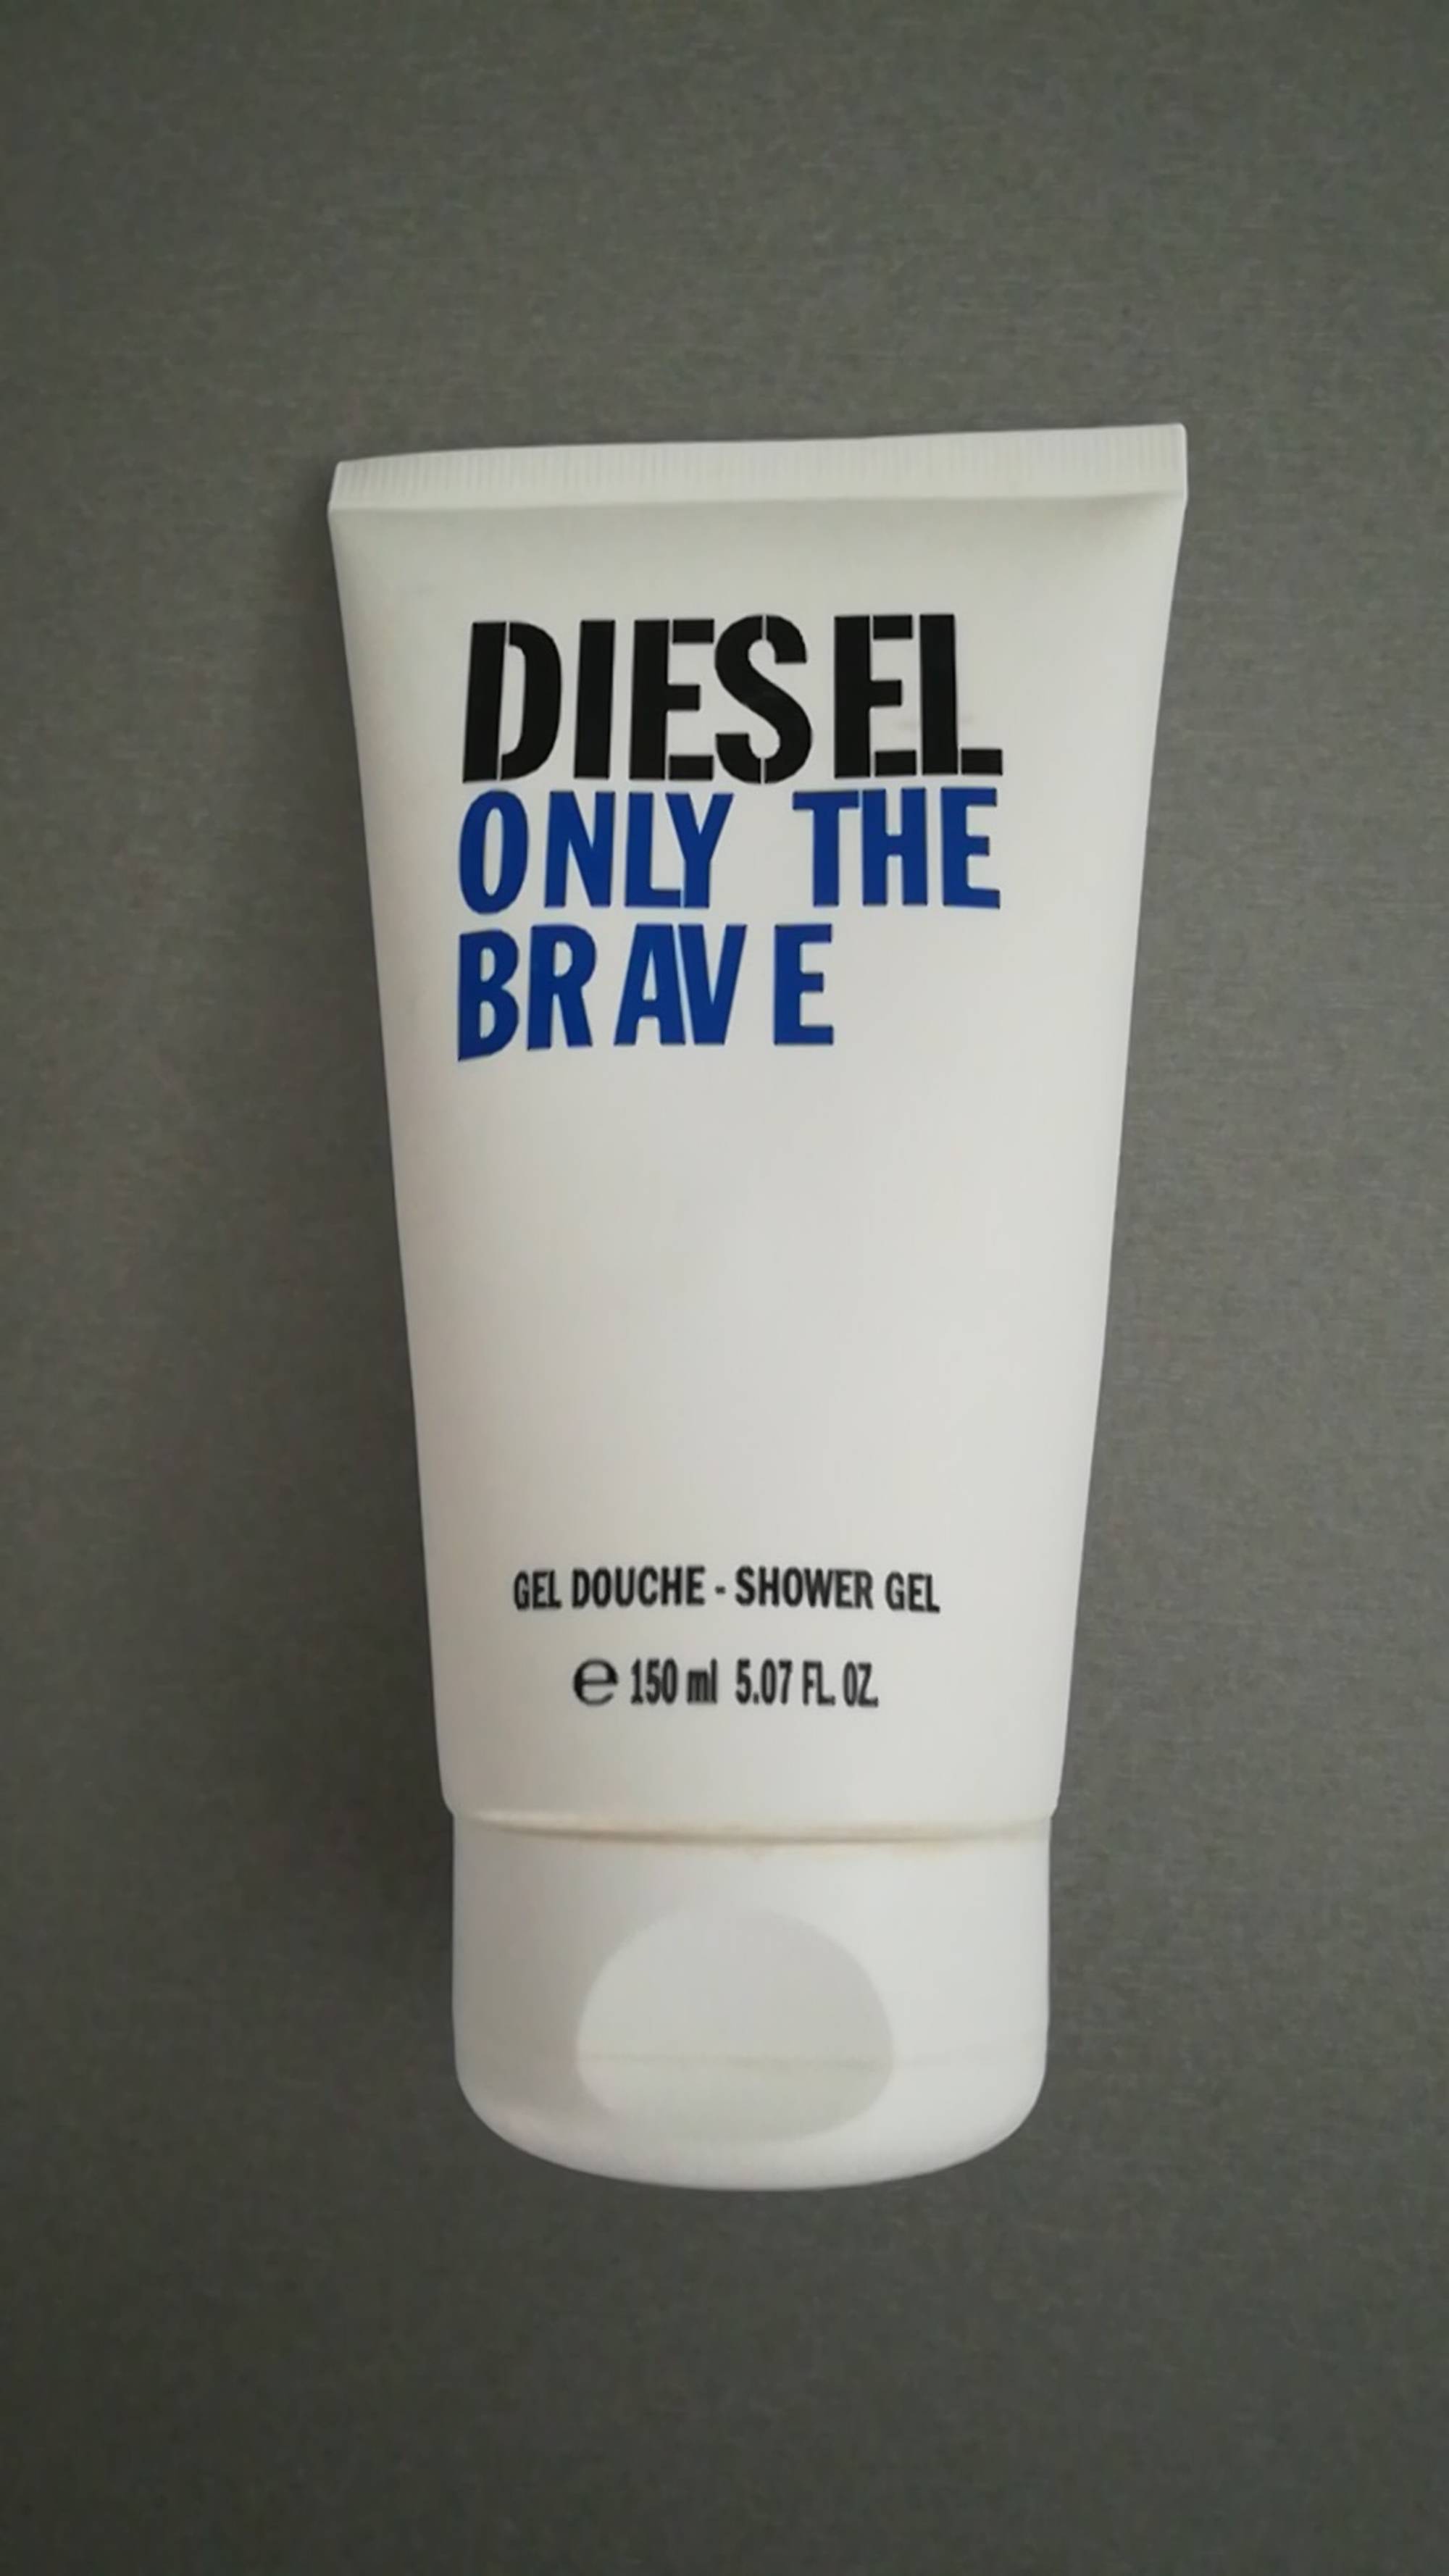 DIESEL - Only the brave - Gel douche